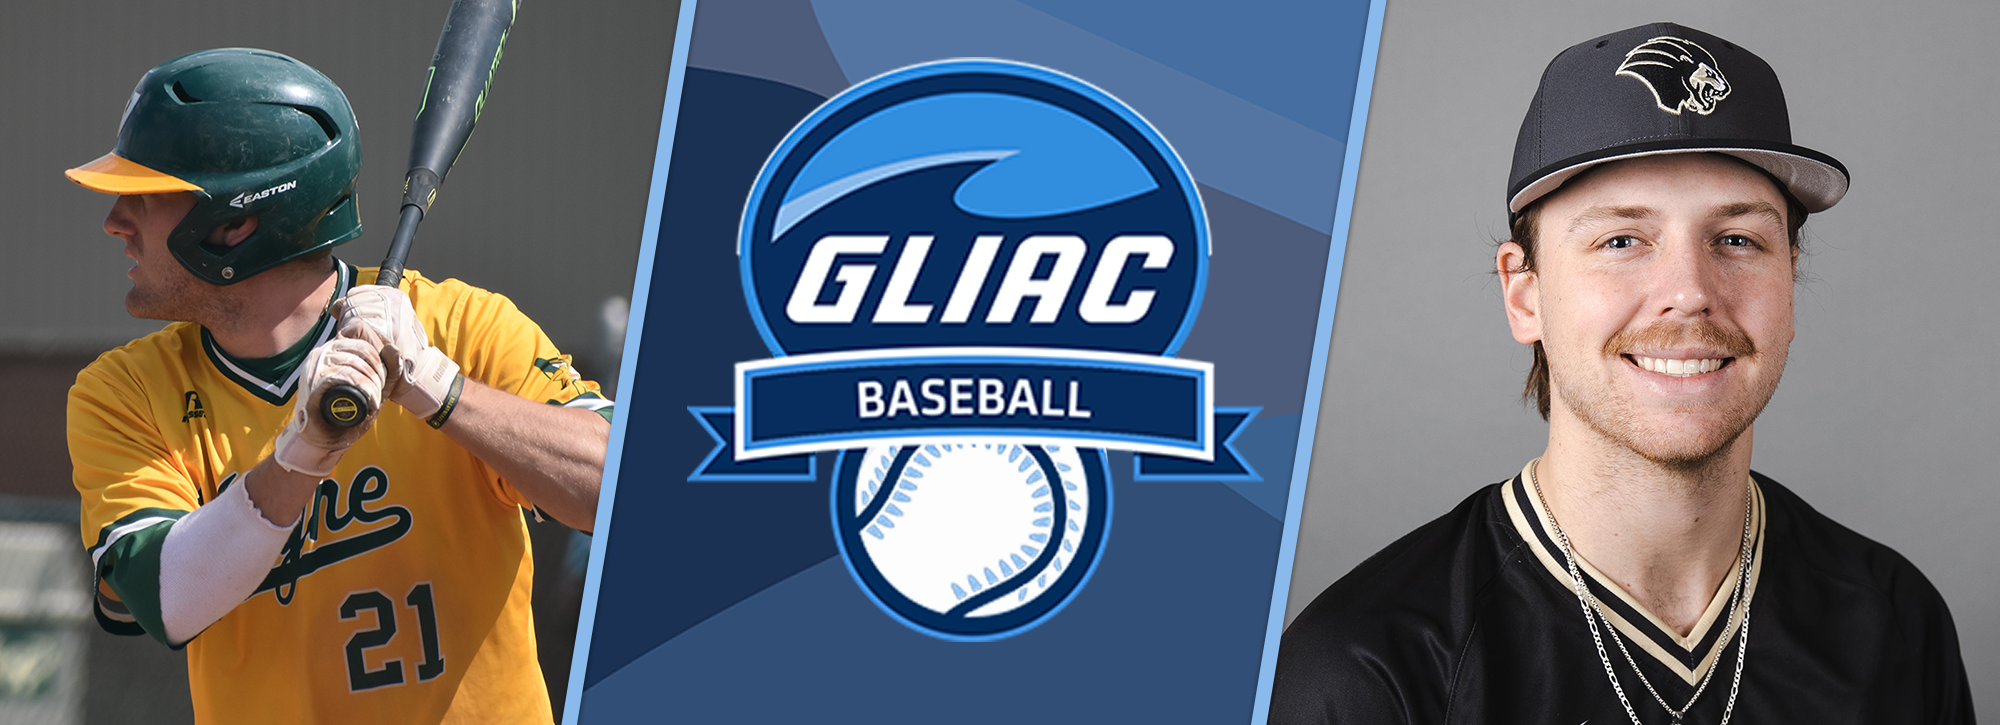 WSU's Tanderys and PNW's Burgh recognized with weekly GLIAC baseball honors